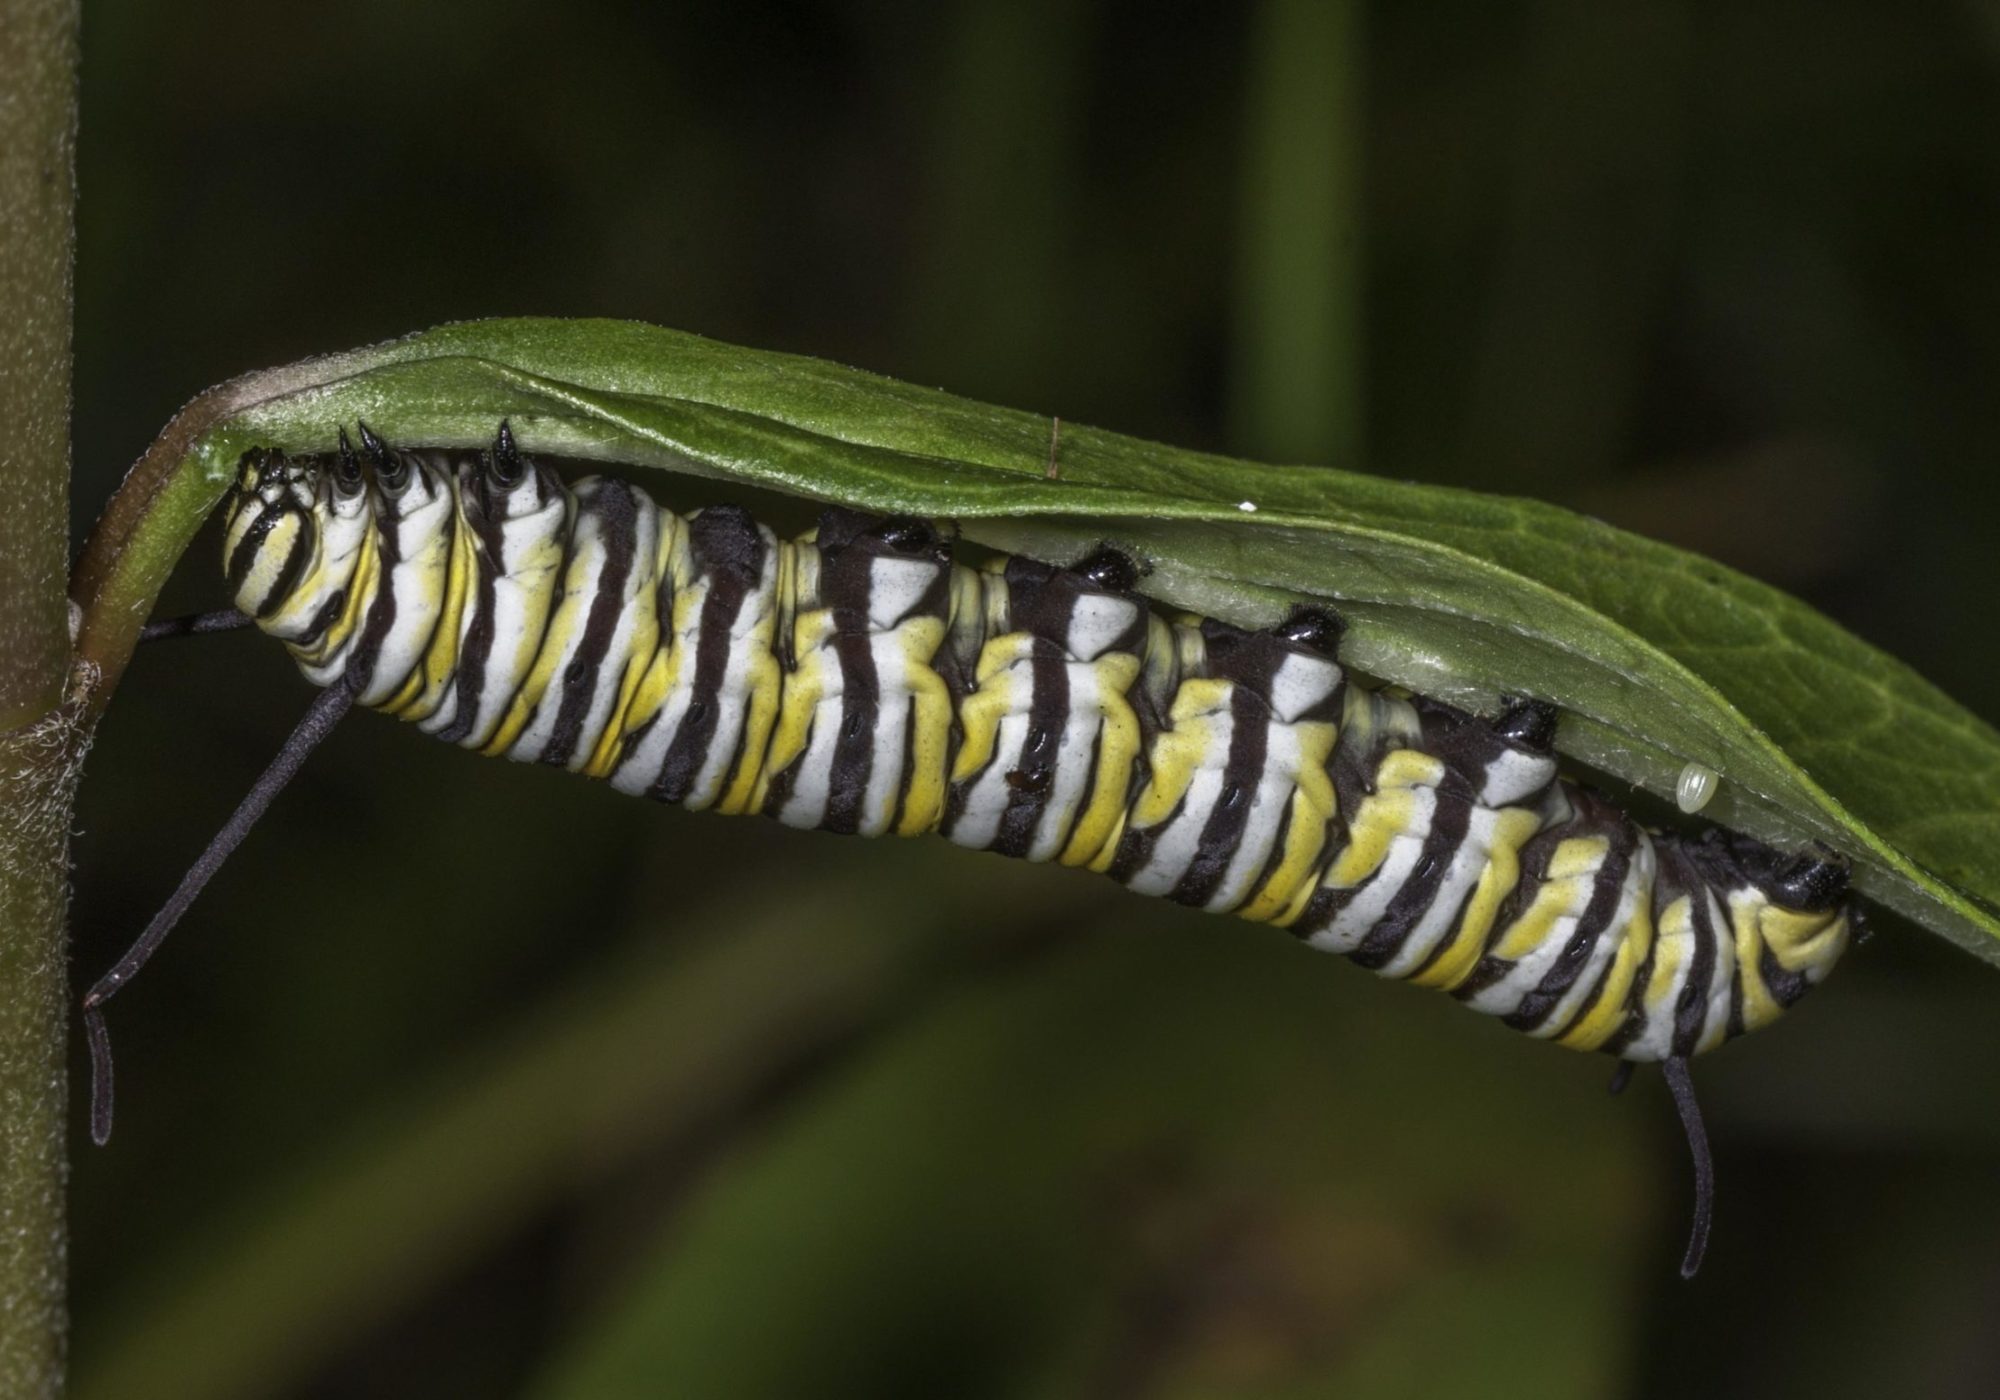 A Monarch caterpillar notches a milkweed leaf to help slow the flow of sap before feeding. An unhatched egg is stuck to the underside of the leaf near the end of the caterpillar. © K.P. McFarland